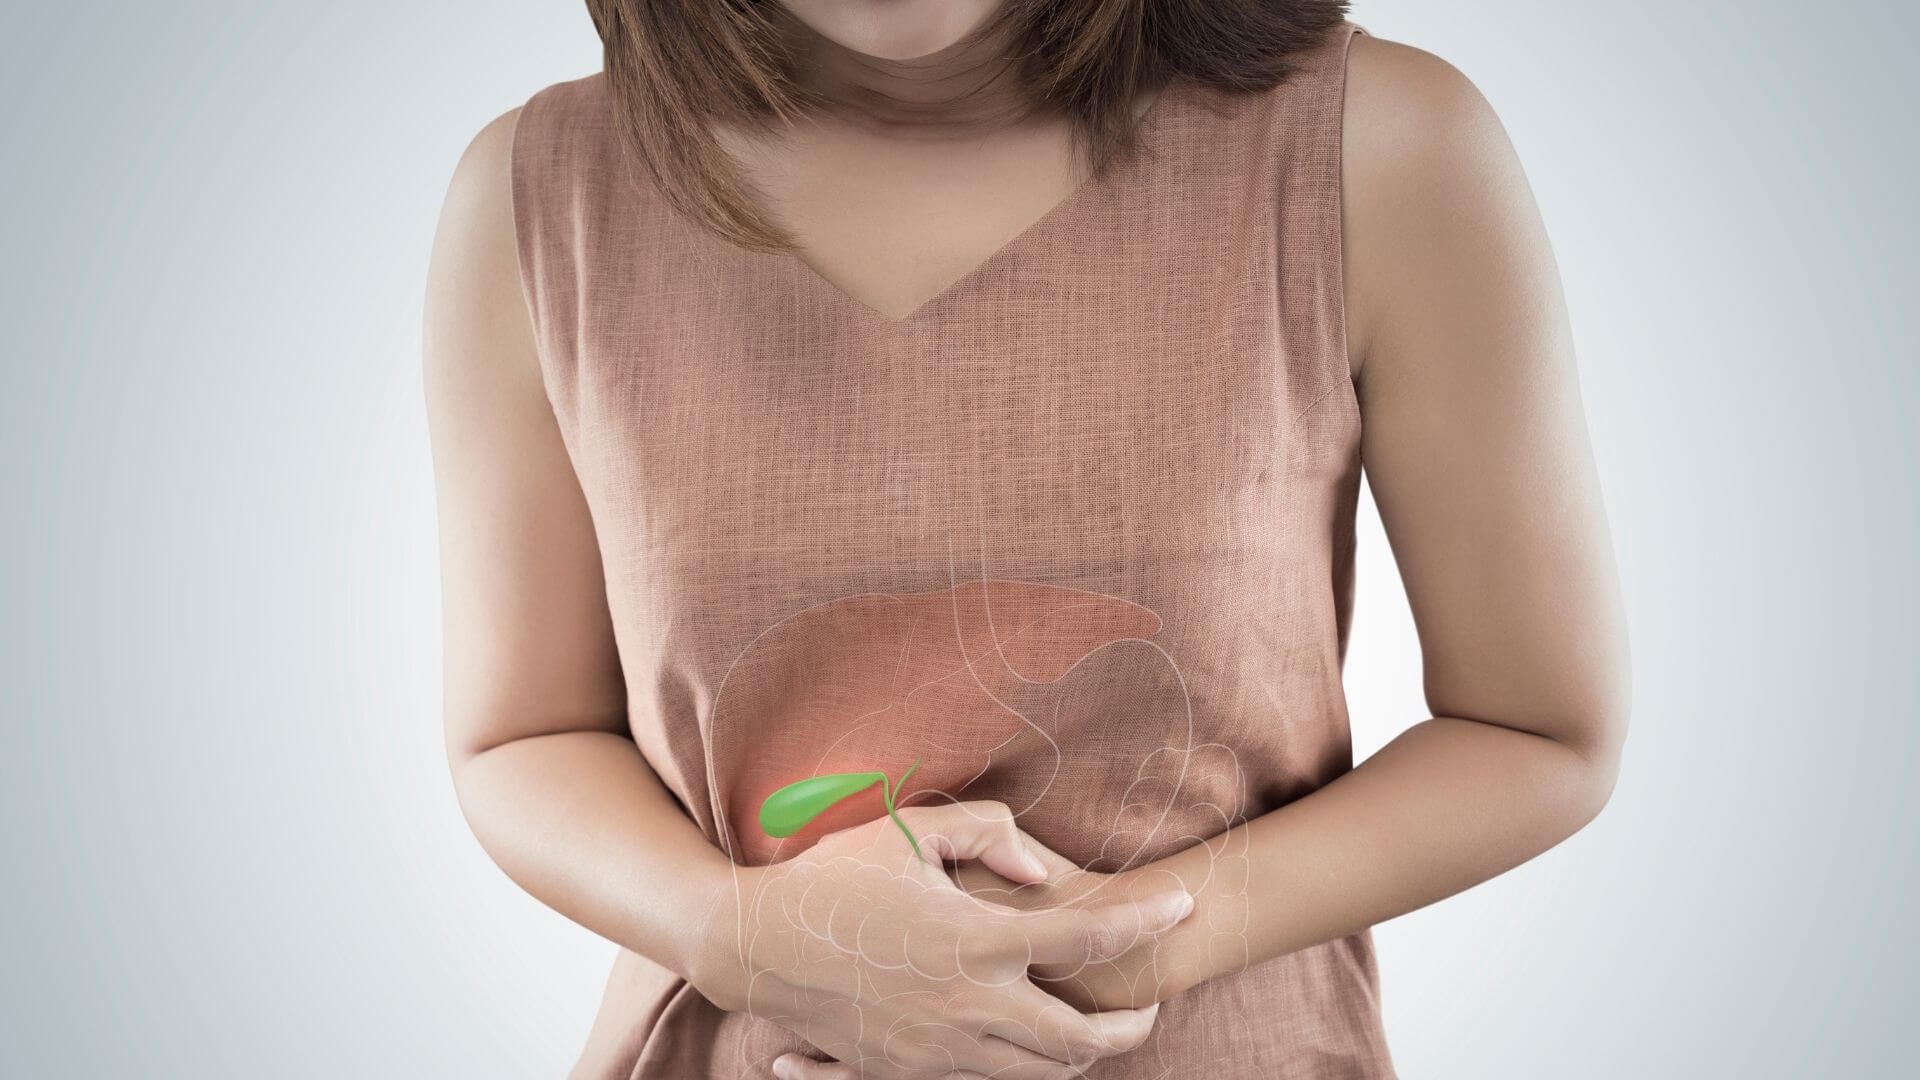 Tips for Avoiding Discomfort After Your Gallbladder Removal Surgery